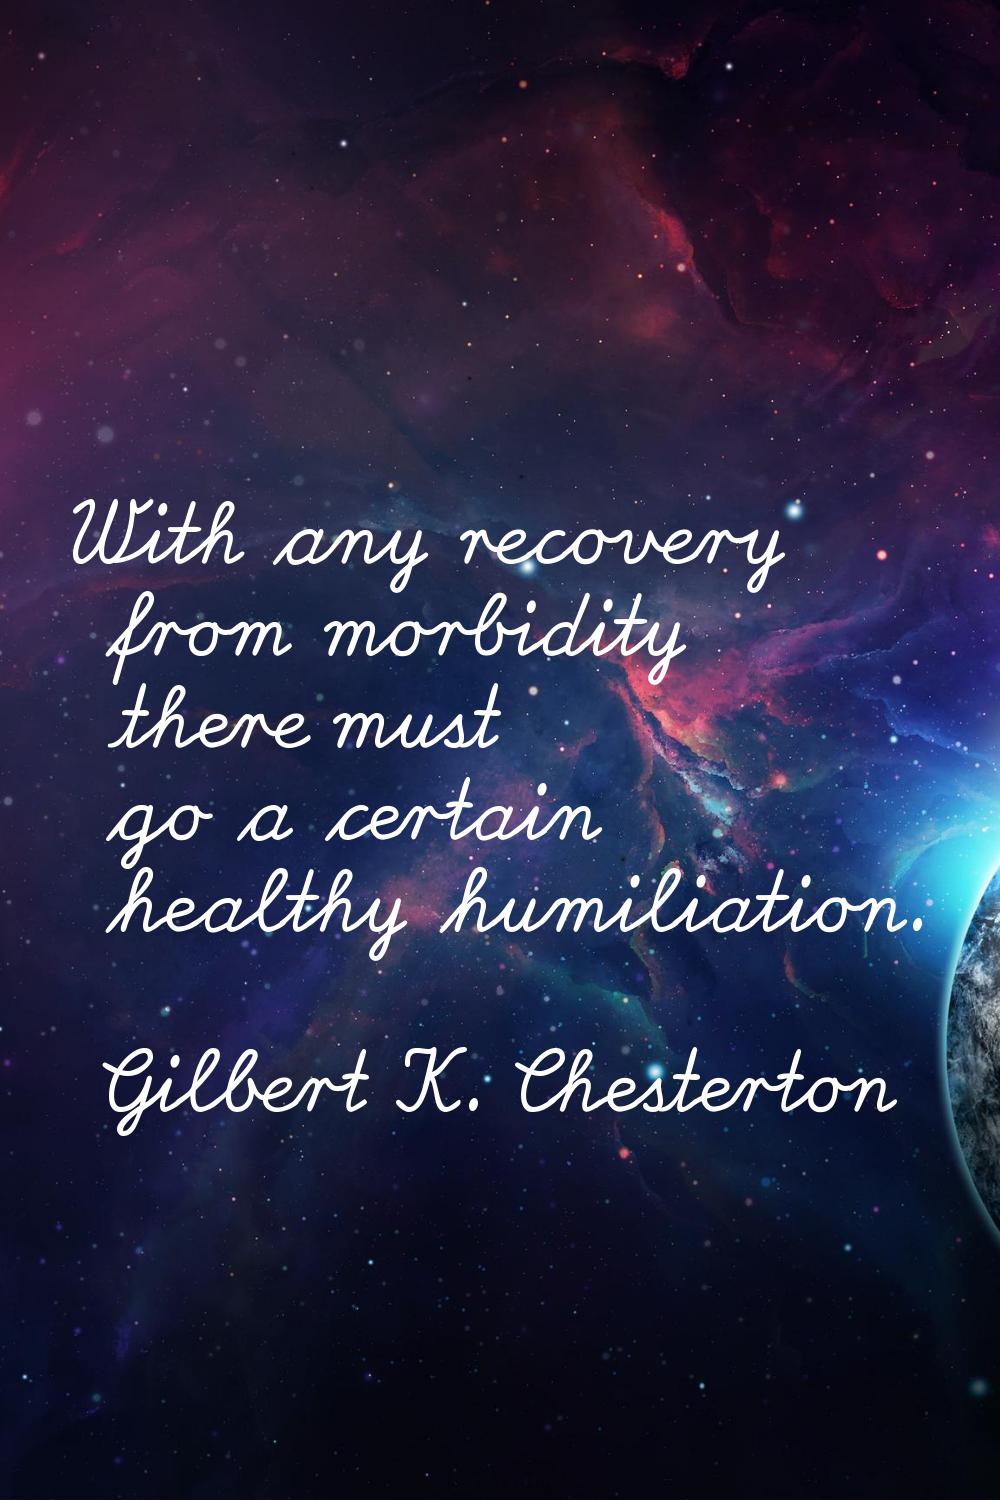 With any recovery from morbidity there must go a certain healthy humiliation.